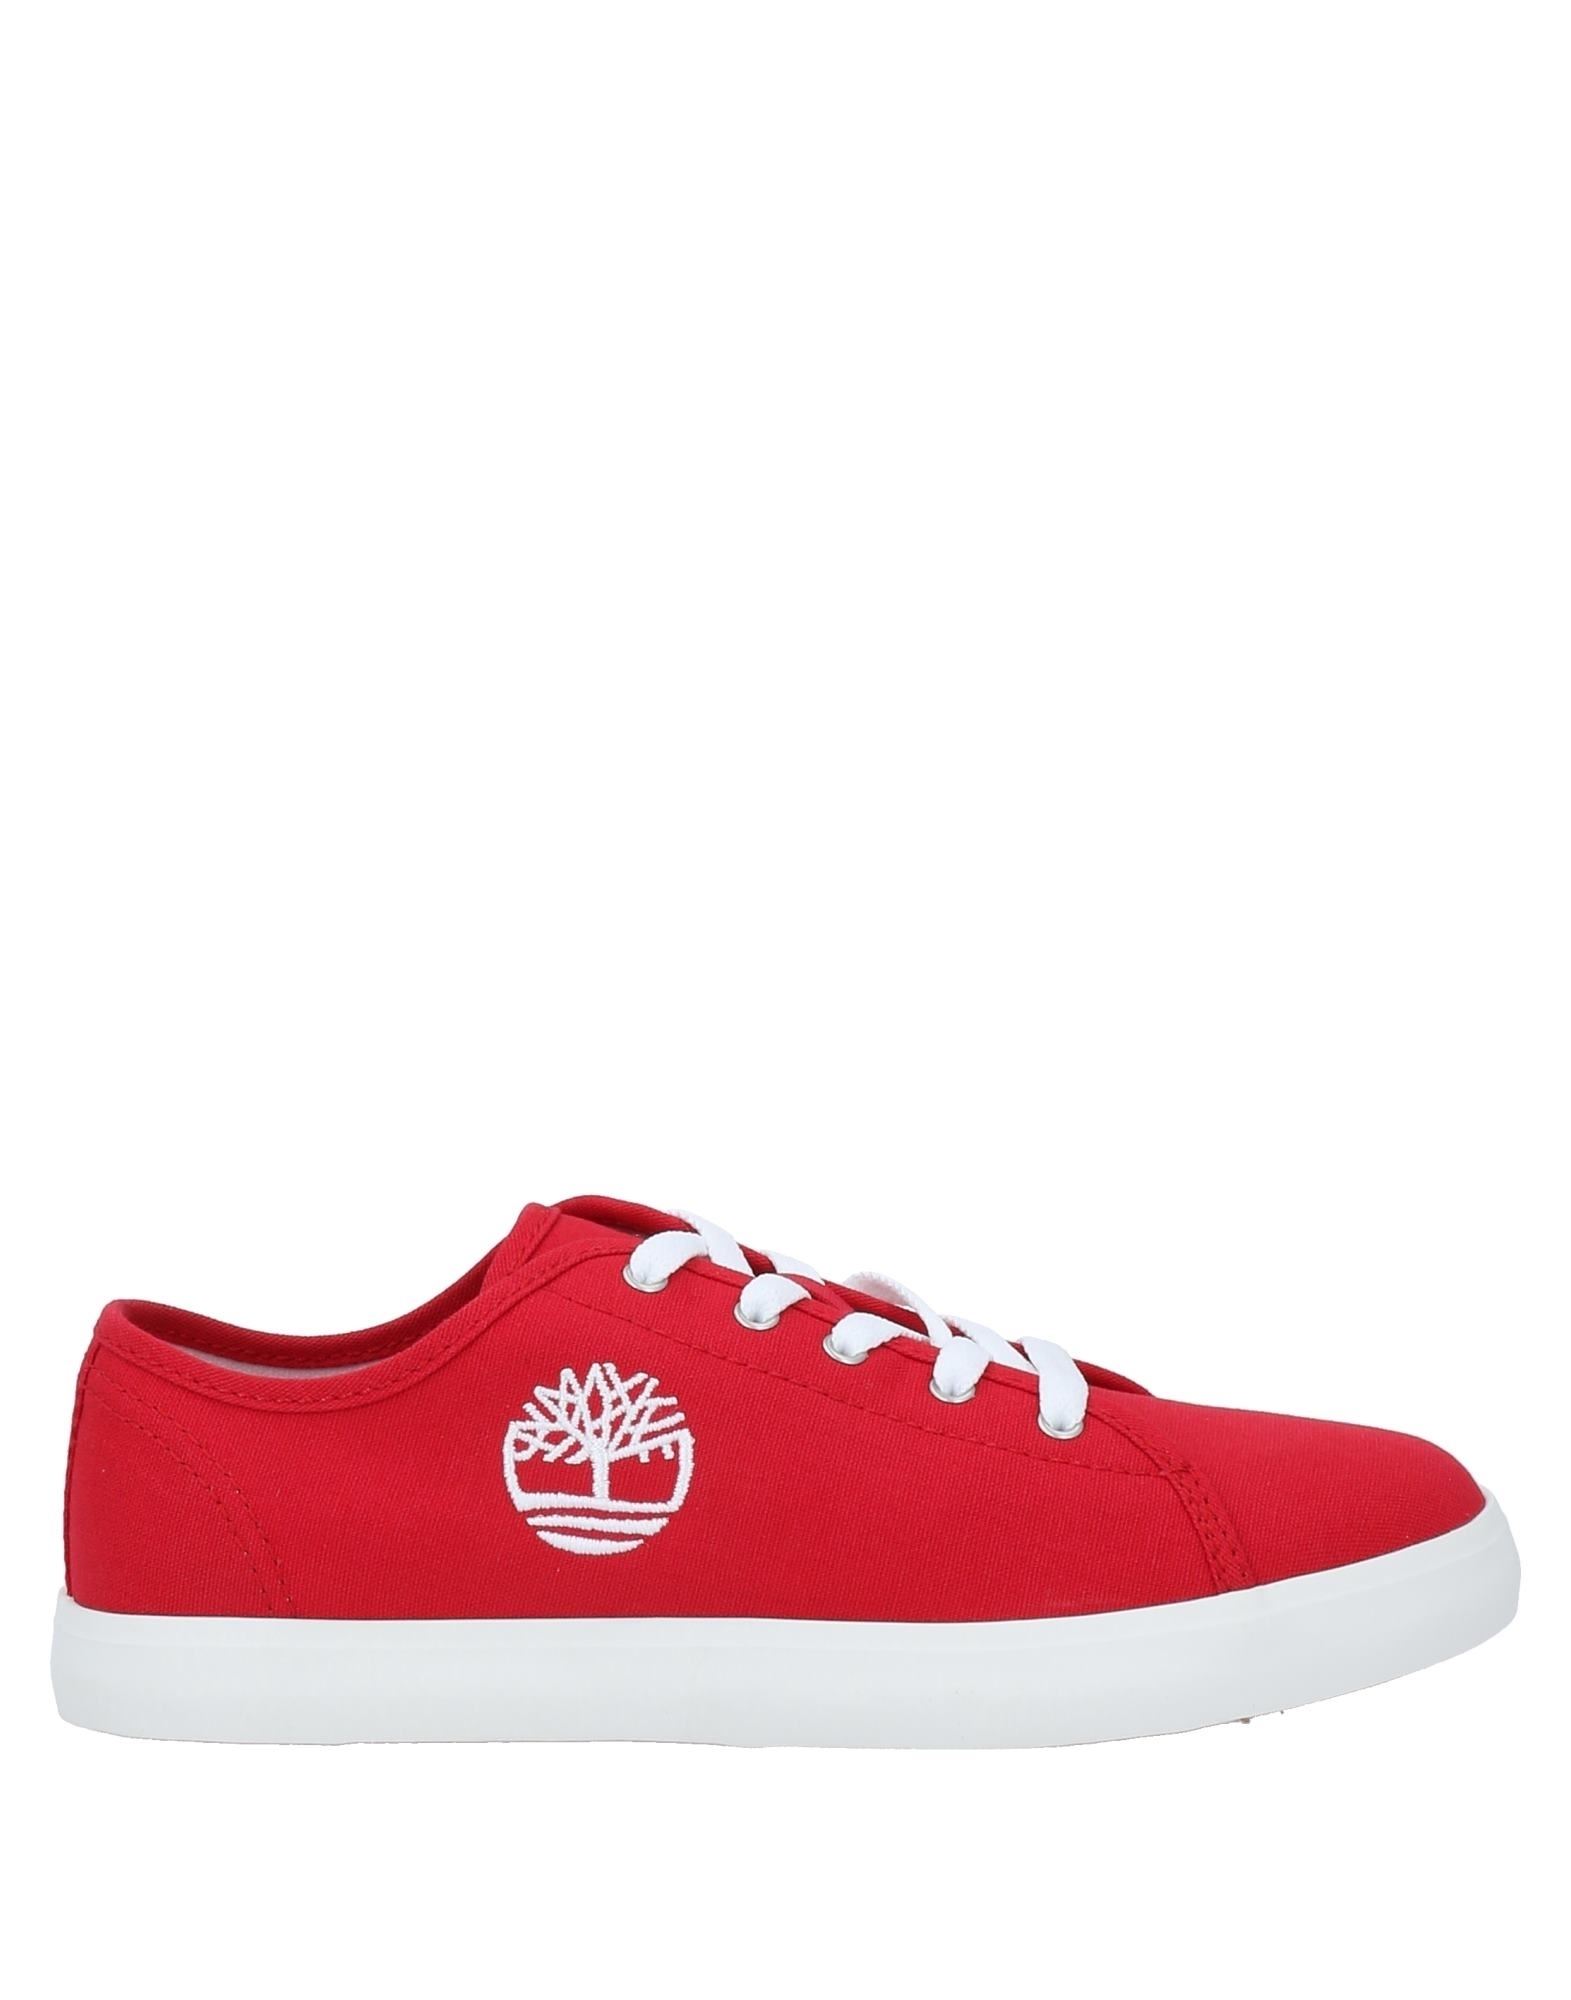 TIMBERLAND Sneakers Kinder Rot von TIMBERLAND